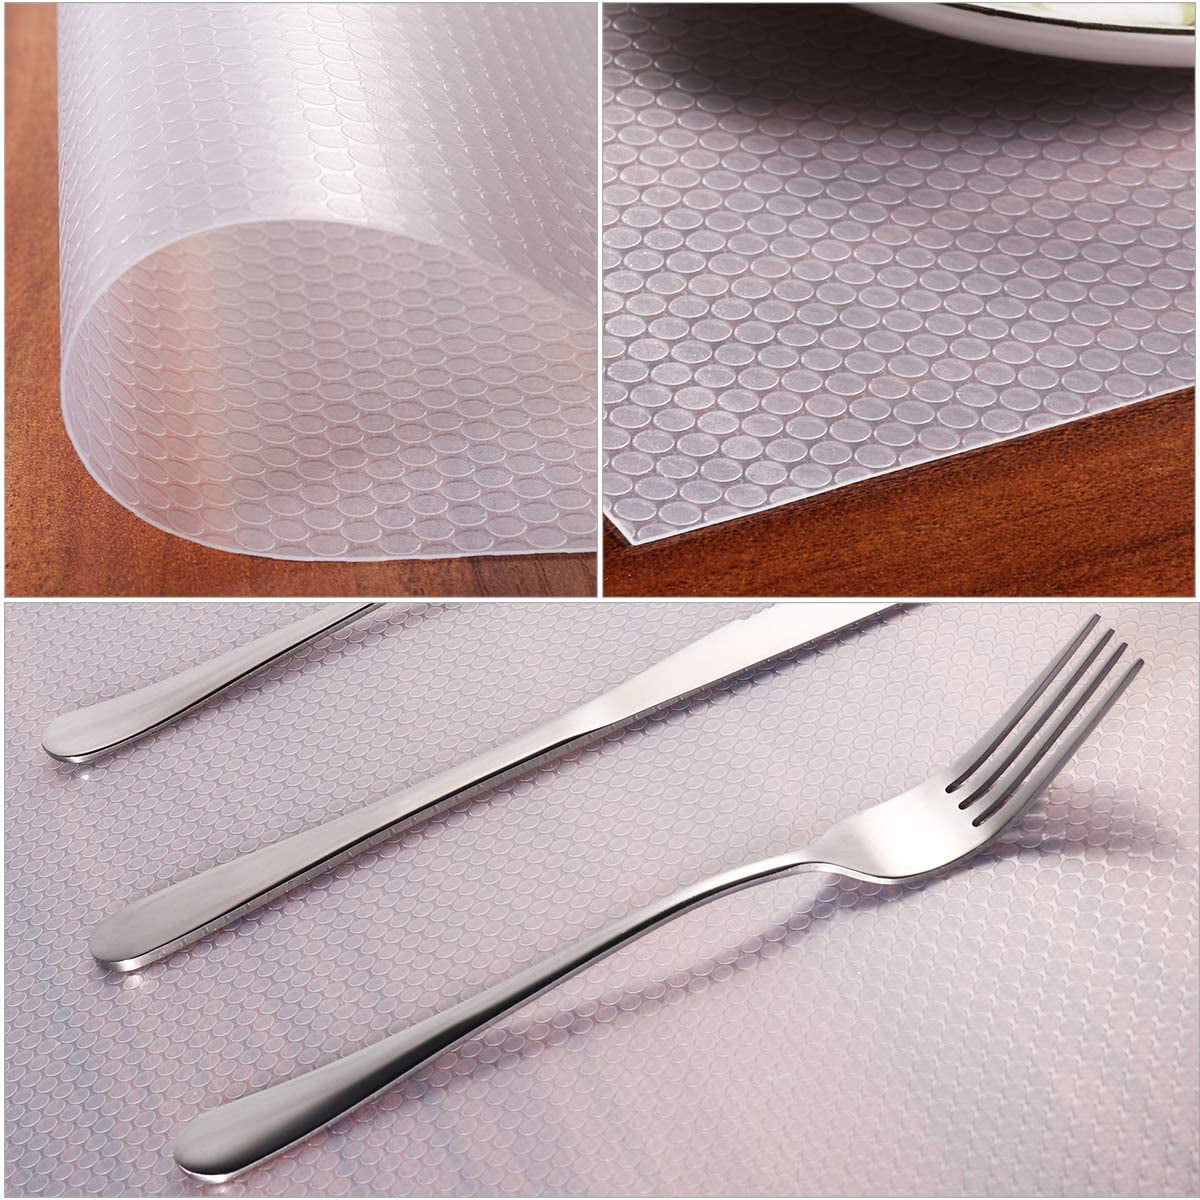 4pcs/Set Transparent, Waterproof, Anti-Skid Drawer Liners For Kitchen  Cabinets, Wardrobes, Shoe Cabinets, Etc.